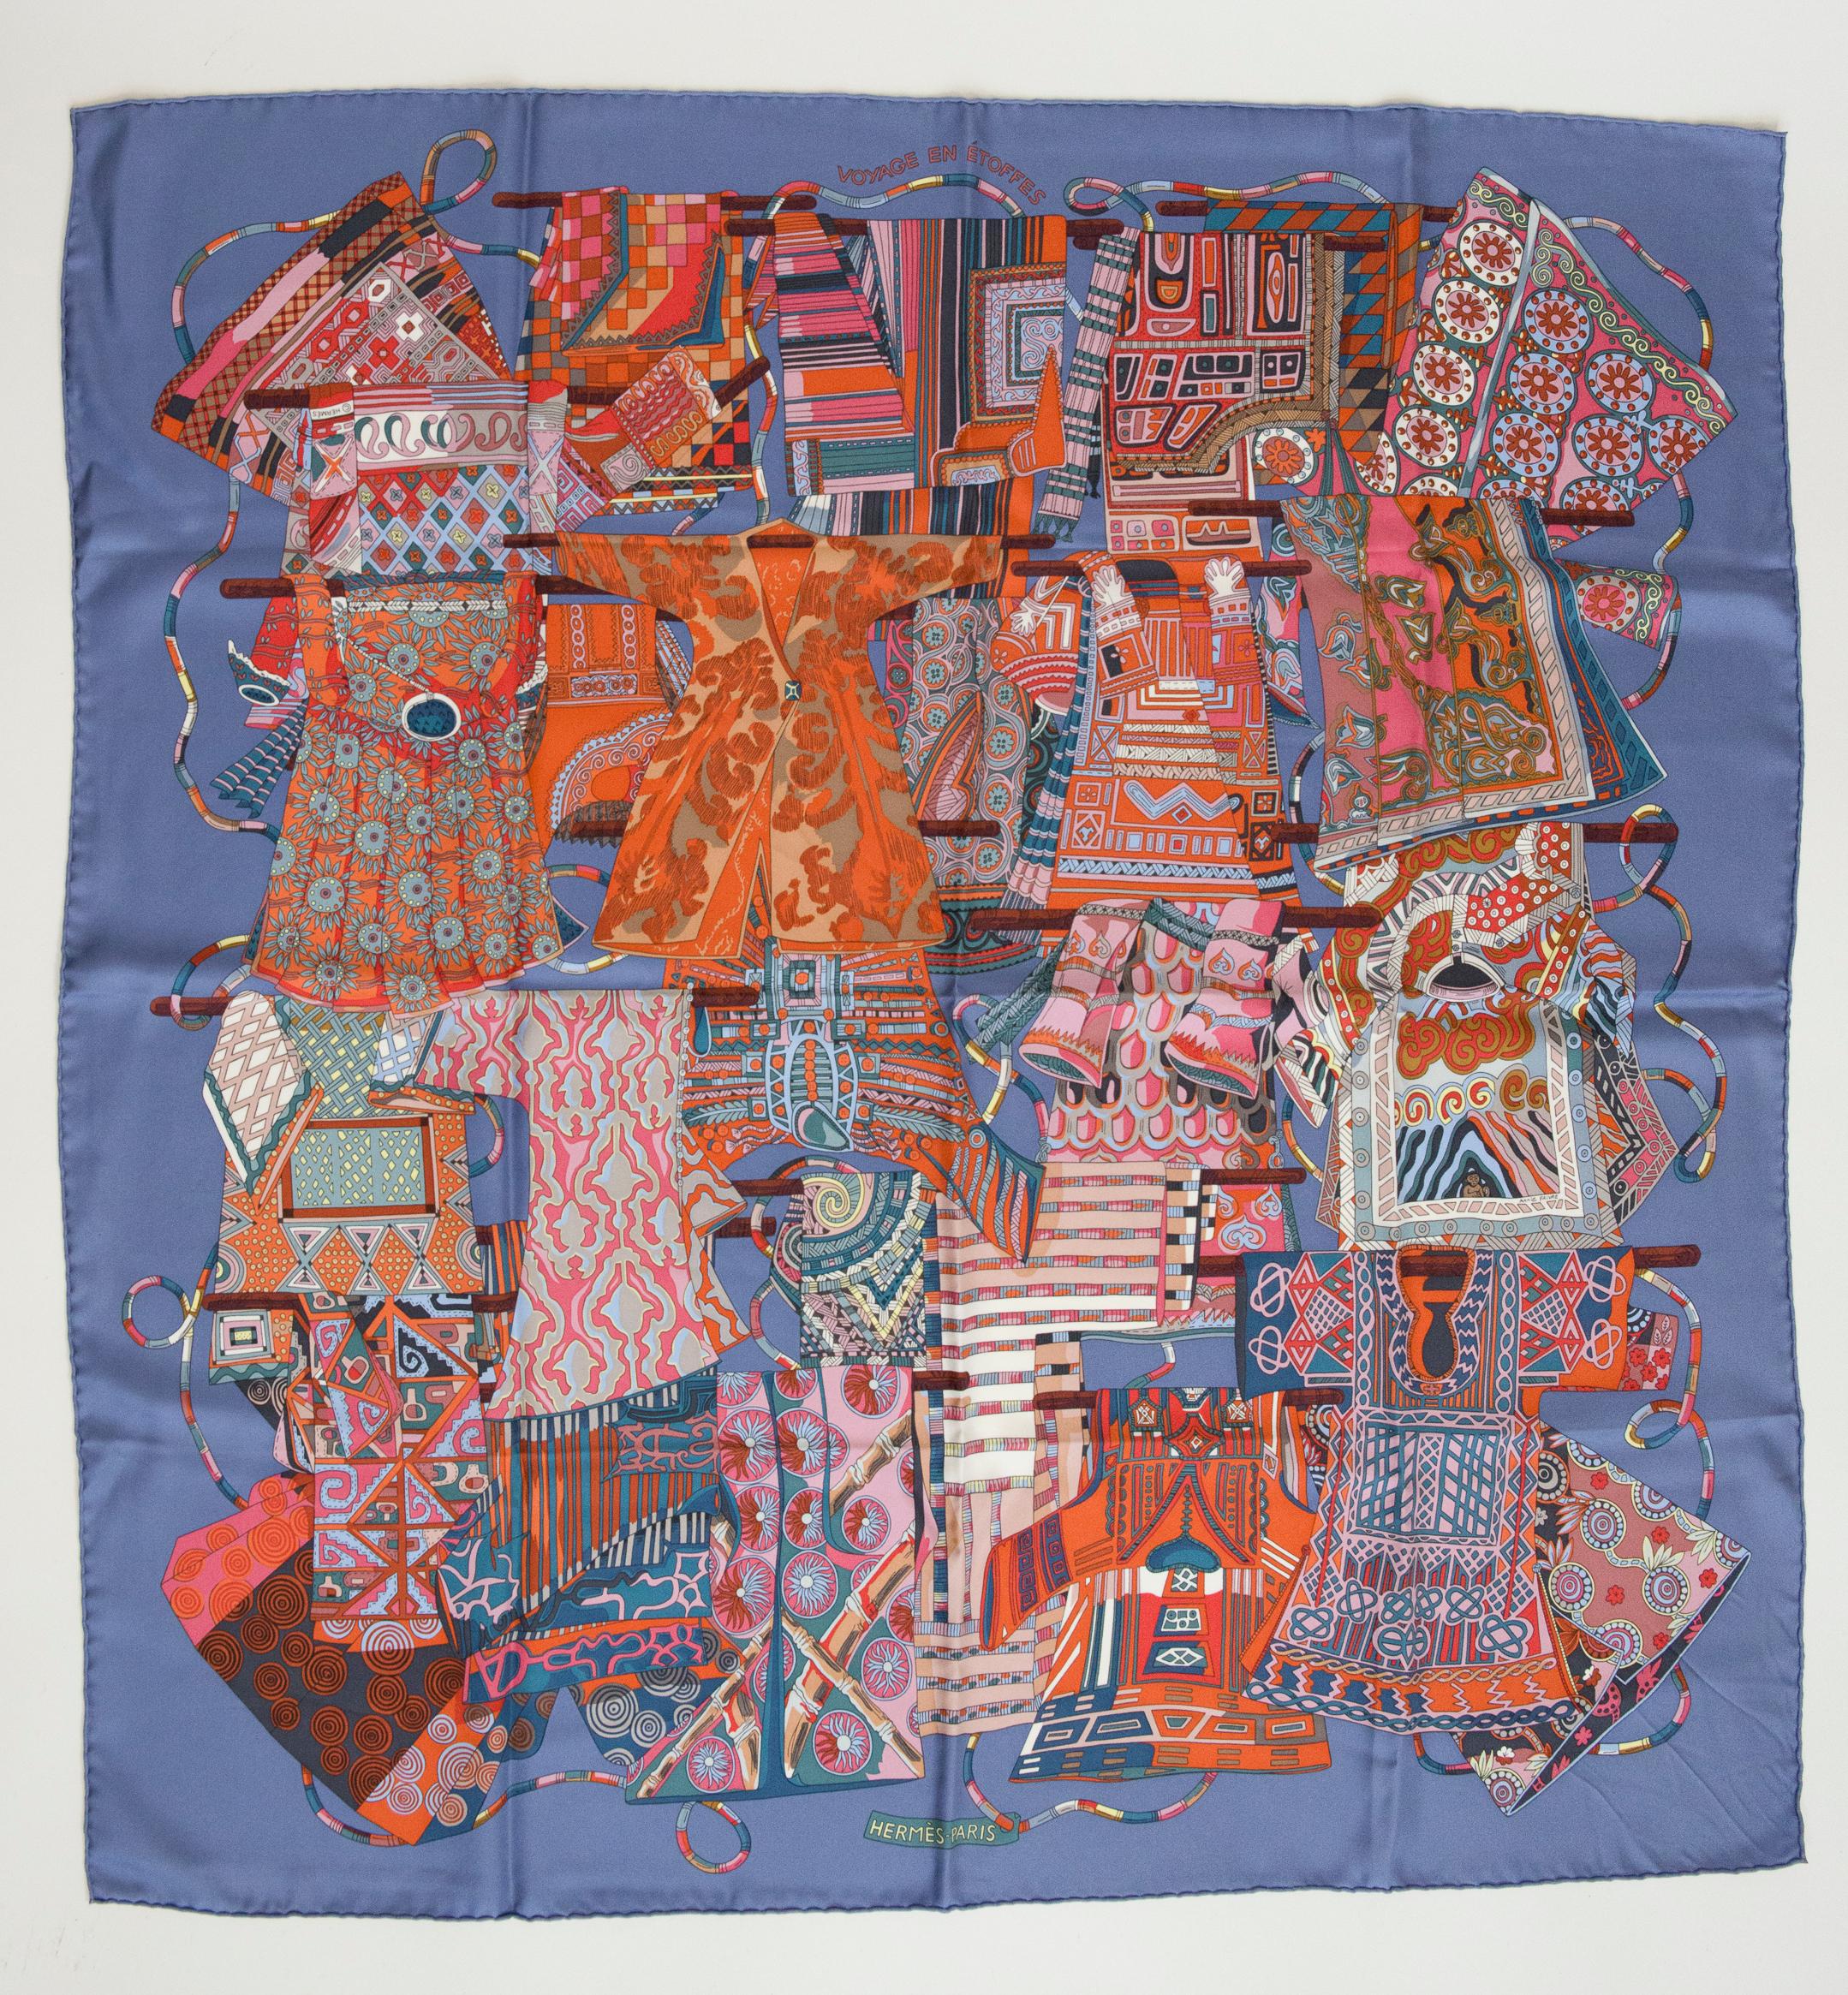 Issued in 2009, the Hermès limited edition custom scarf 